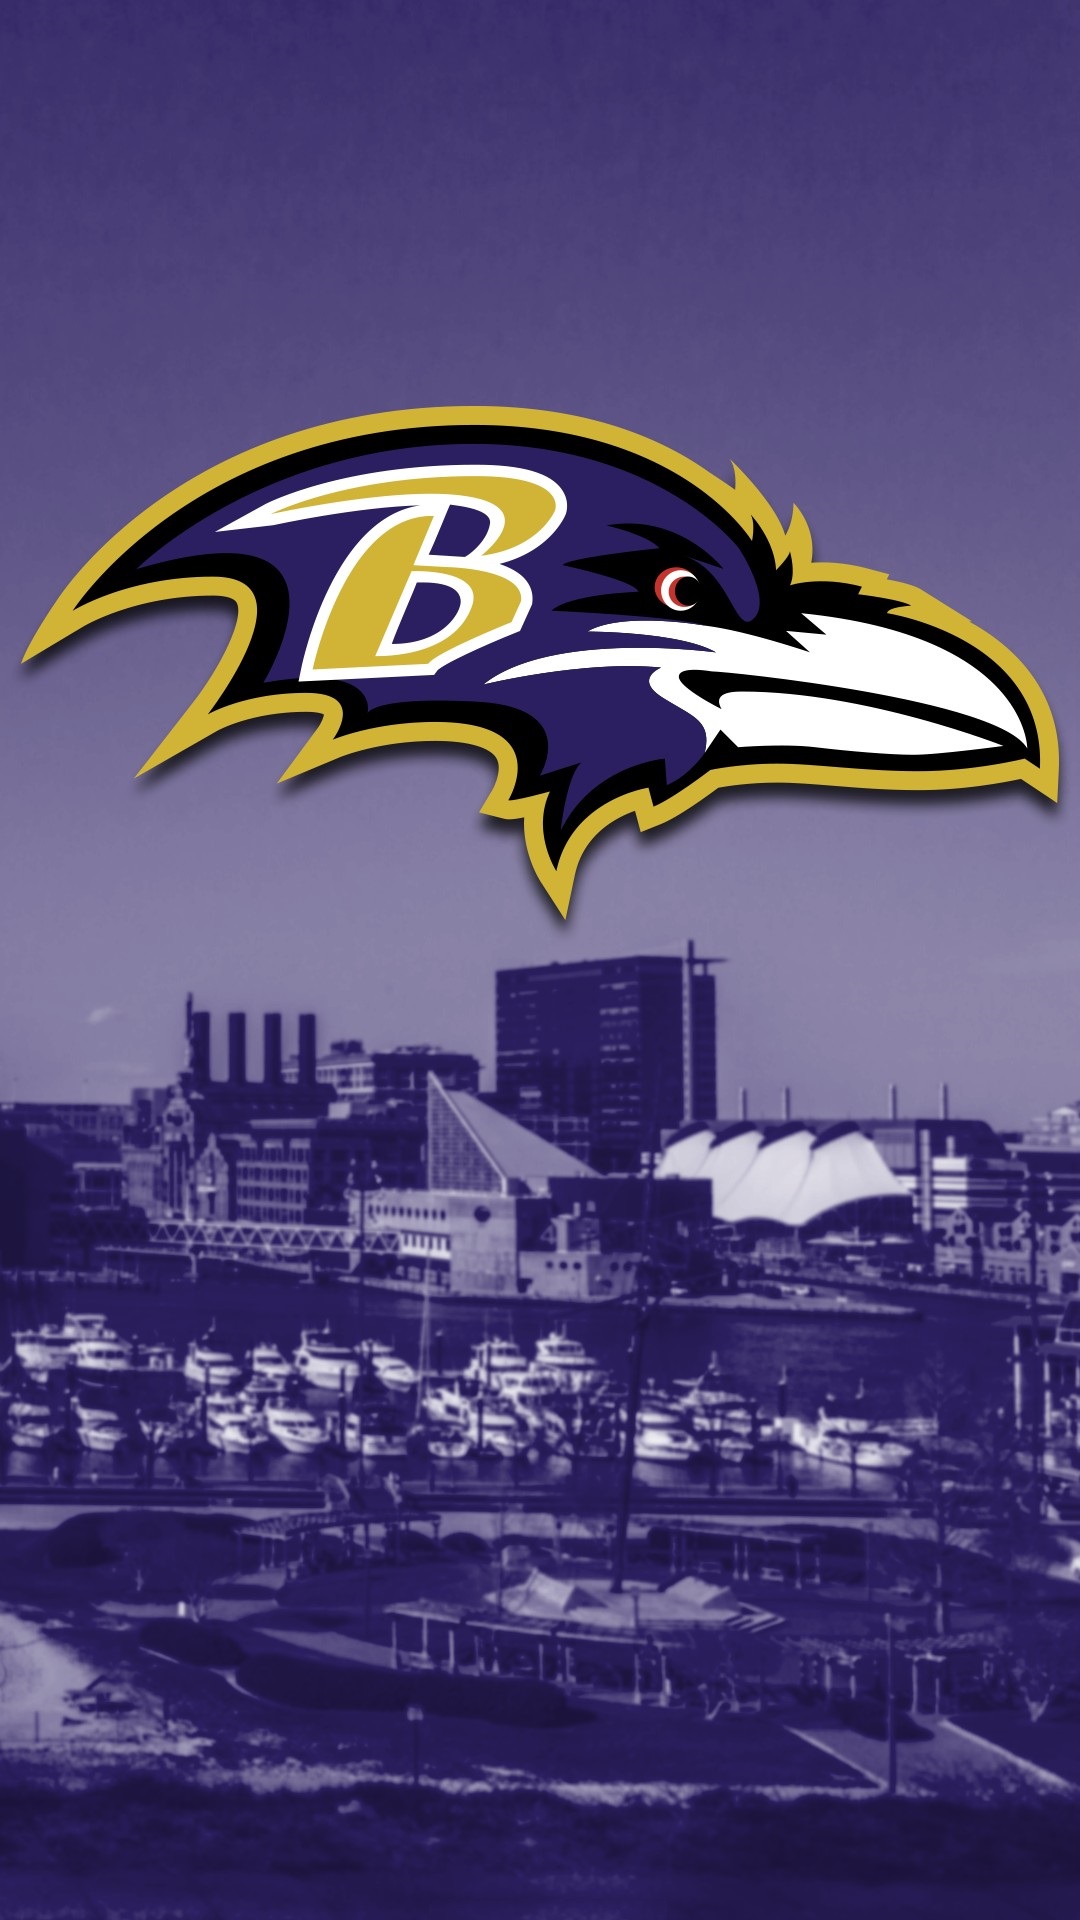 Baltimore Ravens iPhone XS Wallpaper with high-resolution 1080x1920 pixel. Download and set as wallpaper for Apple iPhone X, XS Max, XR, 8, 7, 6, SE, iPad, Android